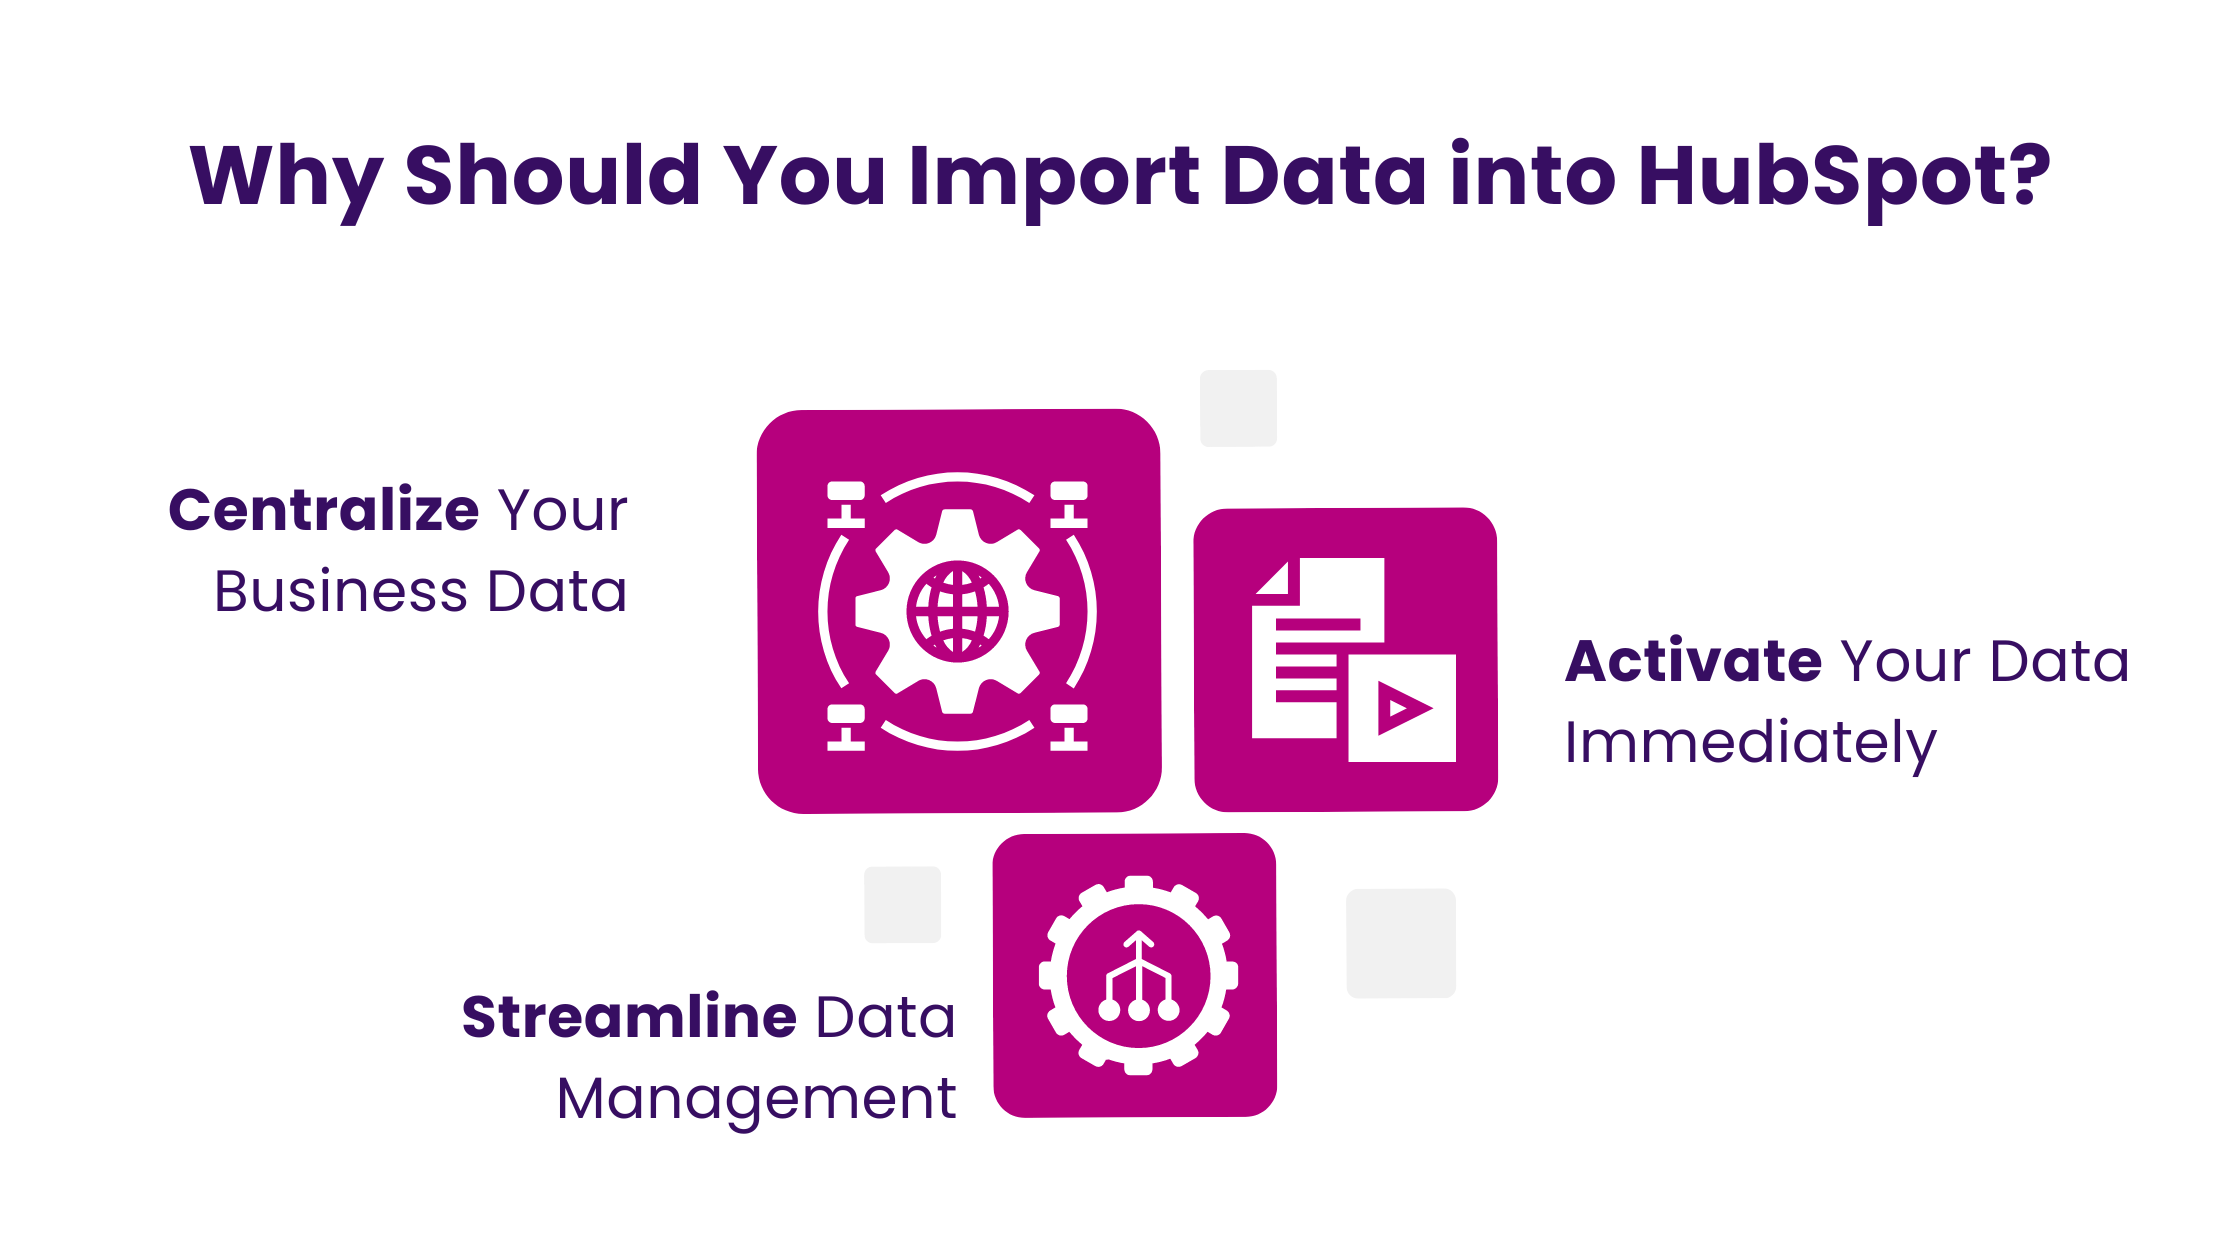 Why Should You Import Data into HubSpot